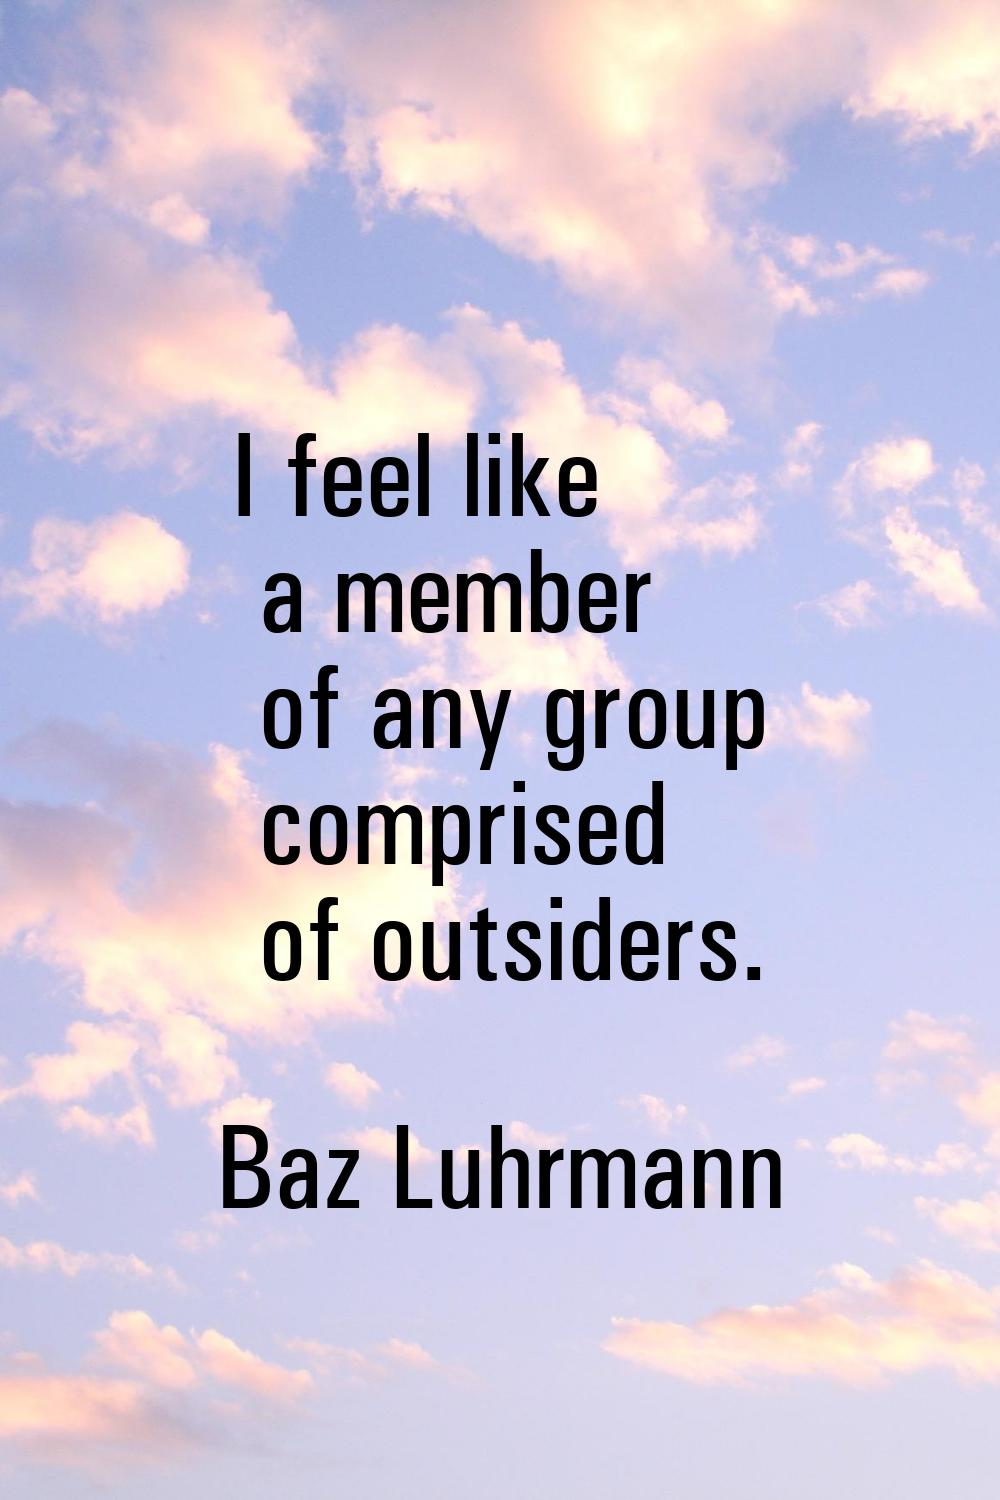 I feel like a member of any group comprised of outsiders.